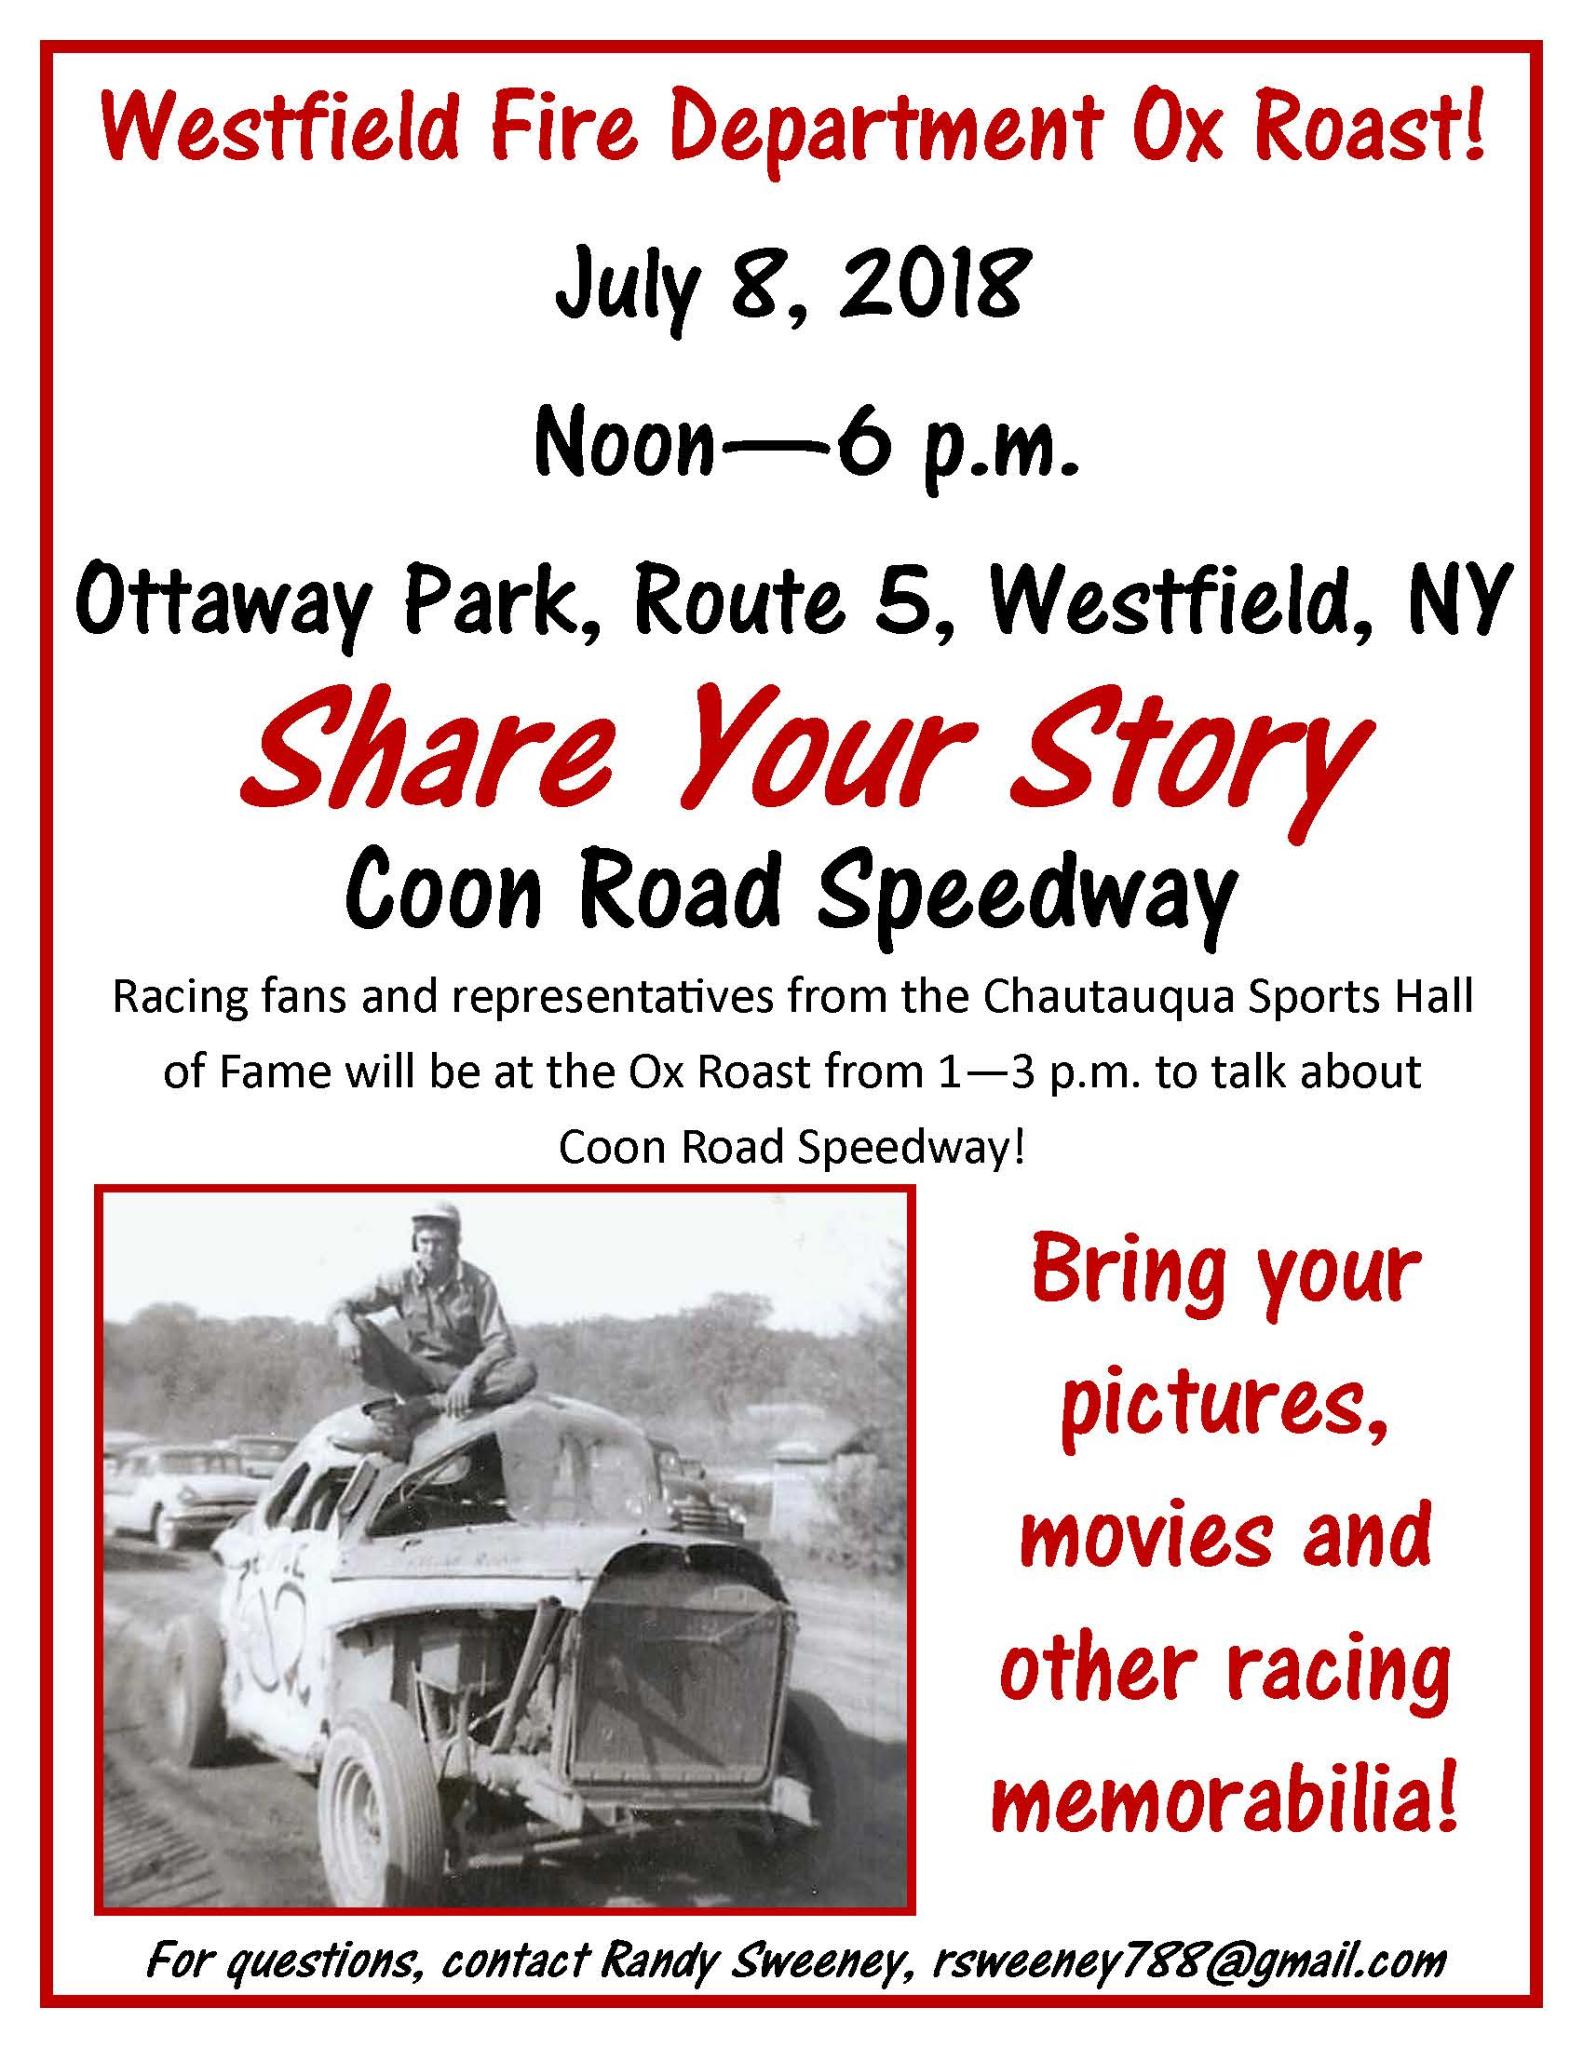 Coon Road Speedway Remembrances